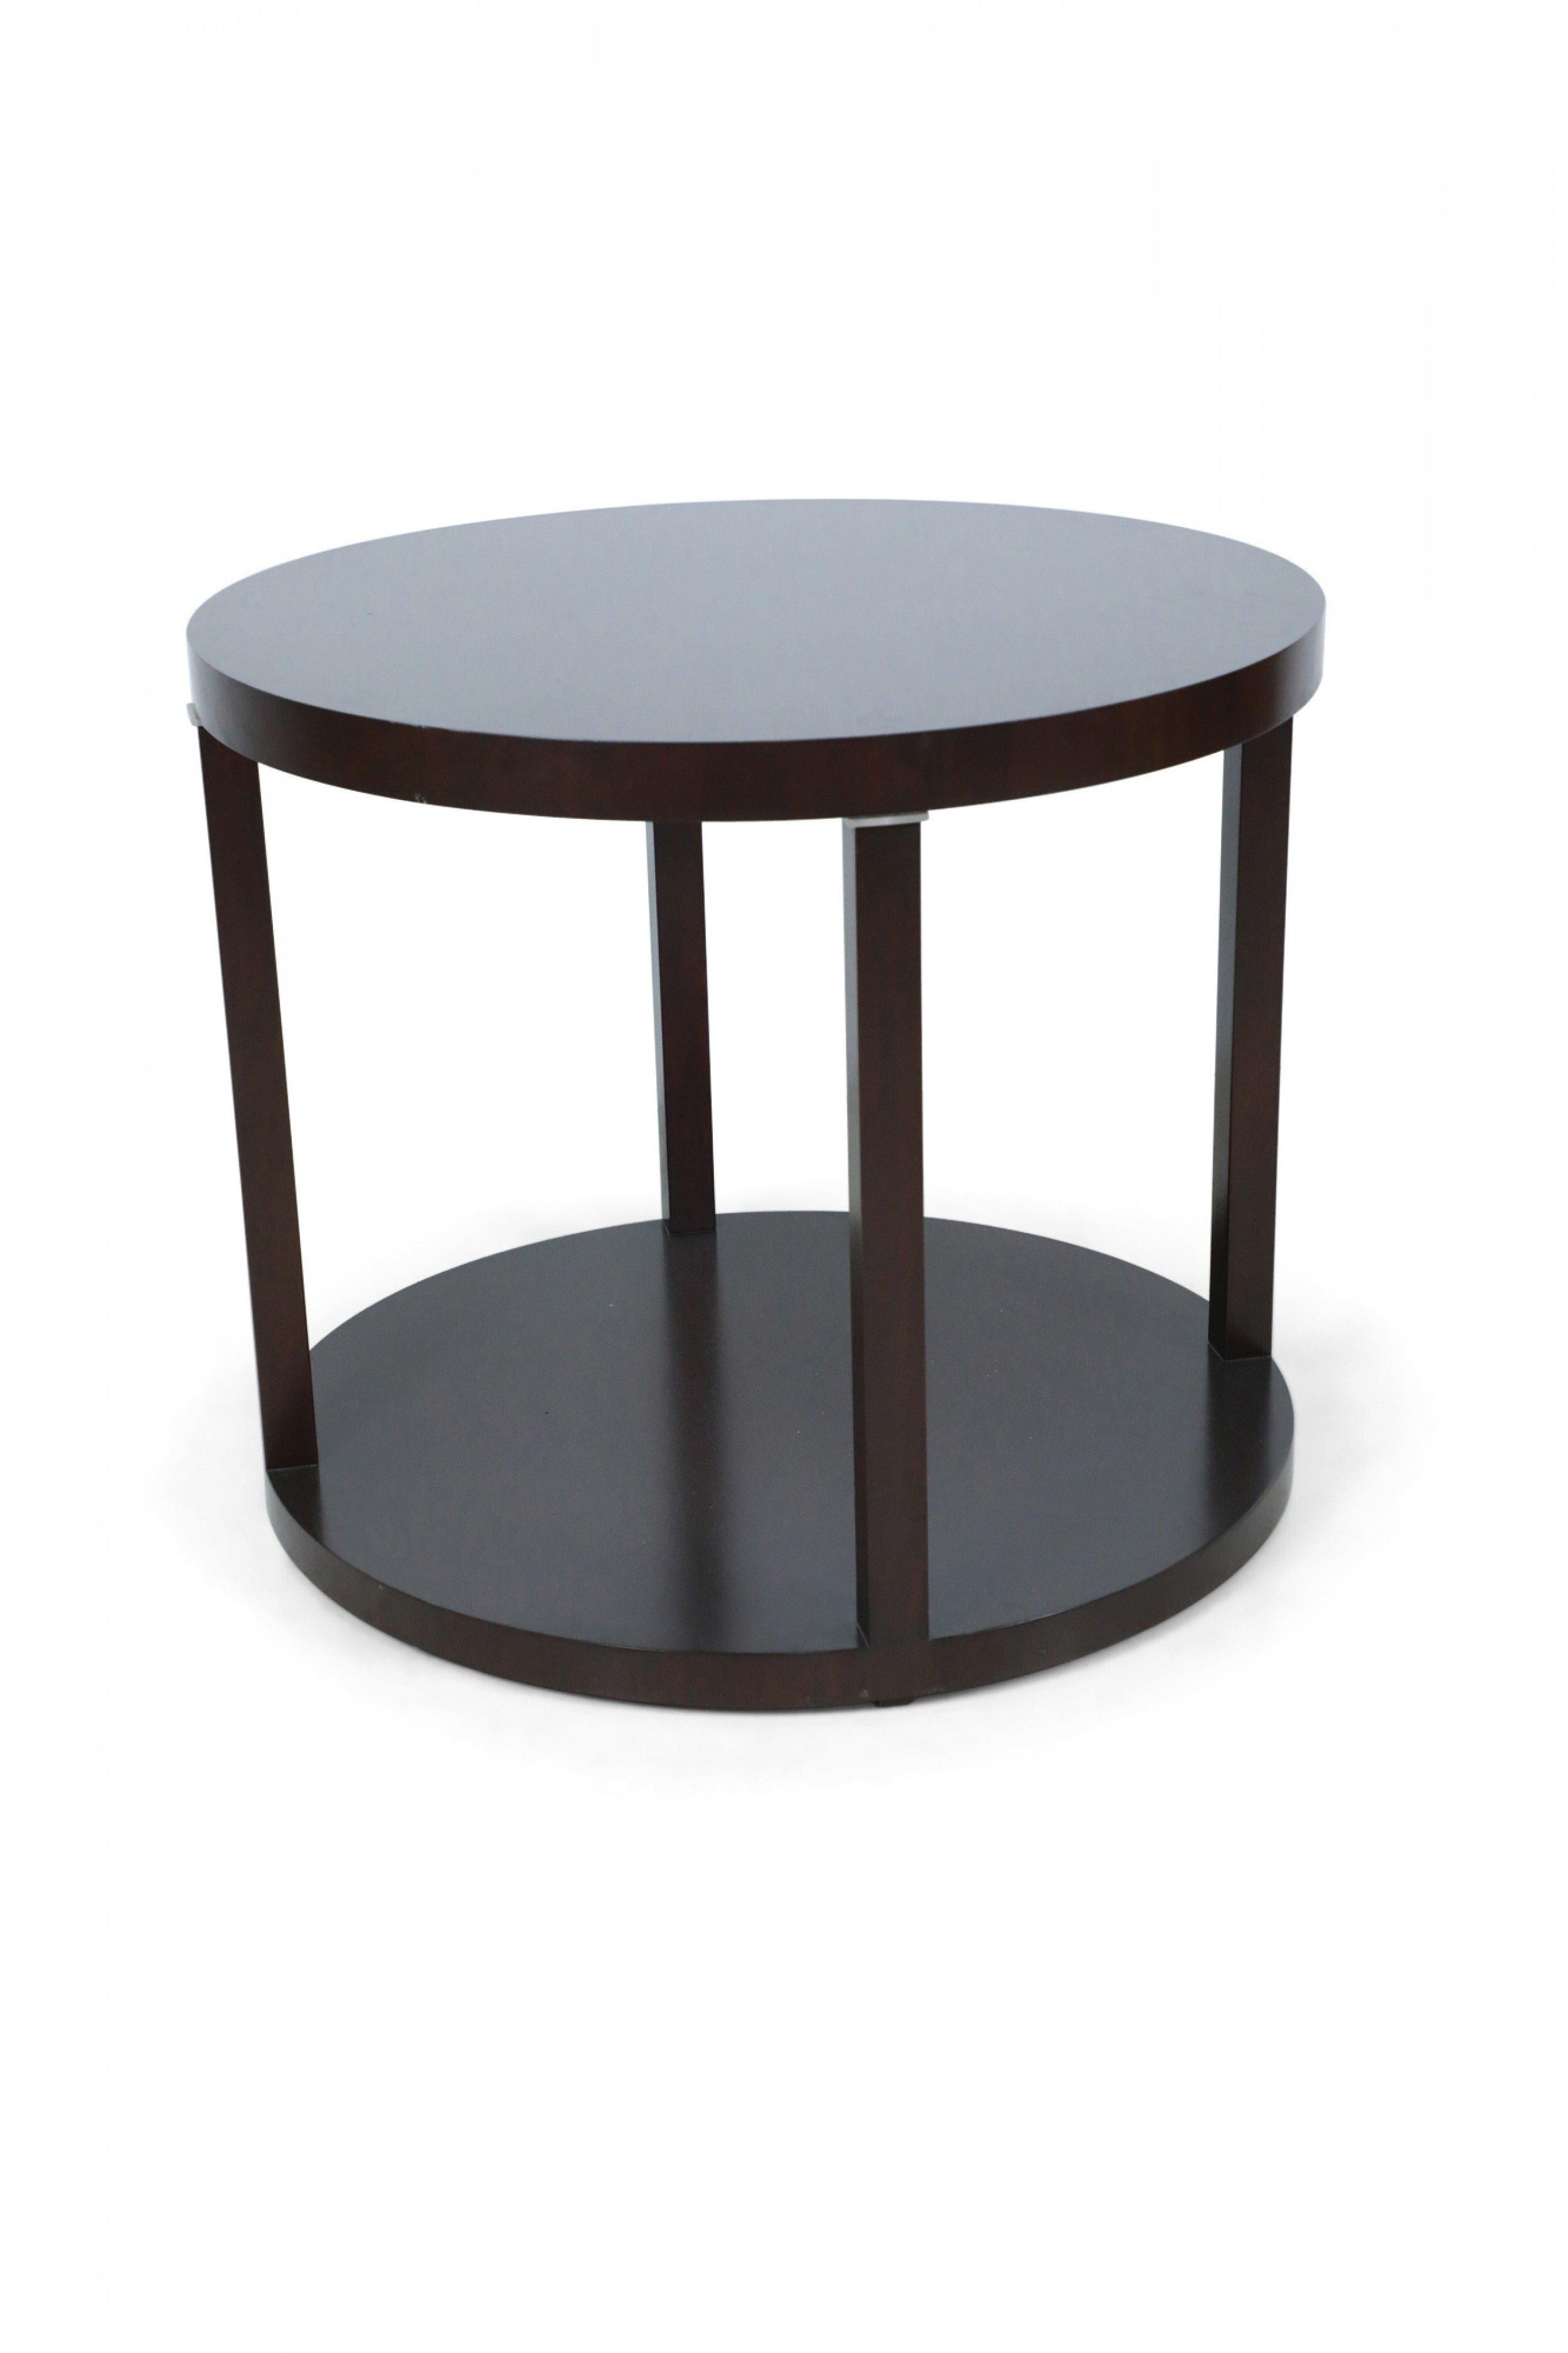 Contemporary round mahogany center table with four cylindrical legs atop a round platform base, with stainless steel detail at tops of columns.